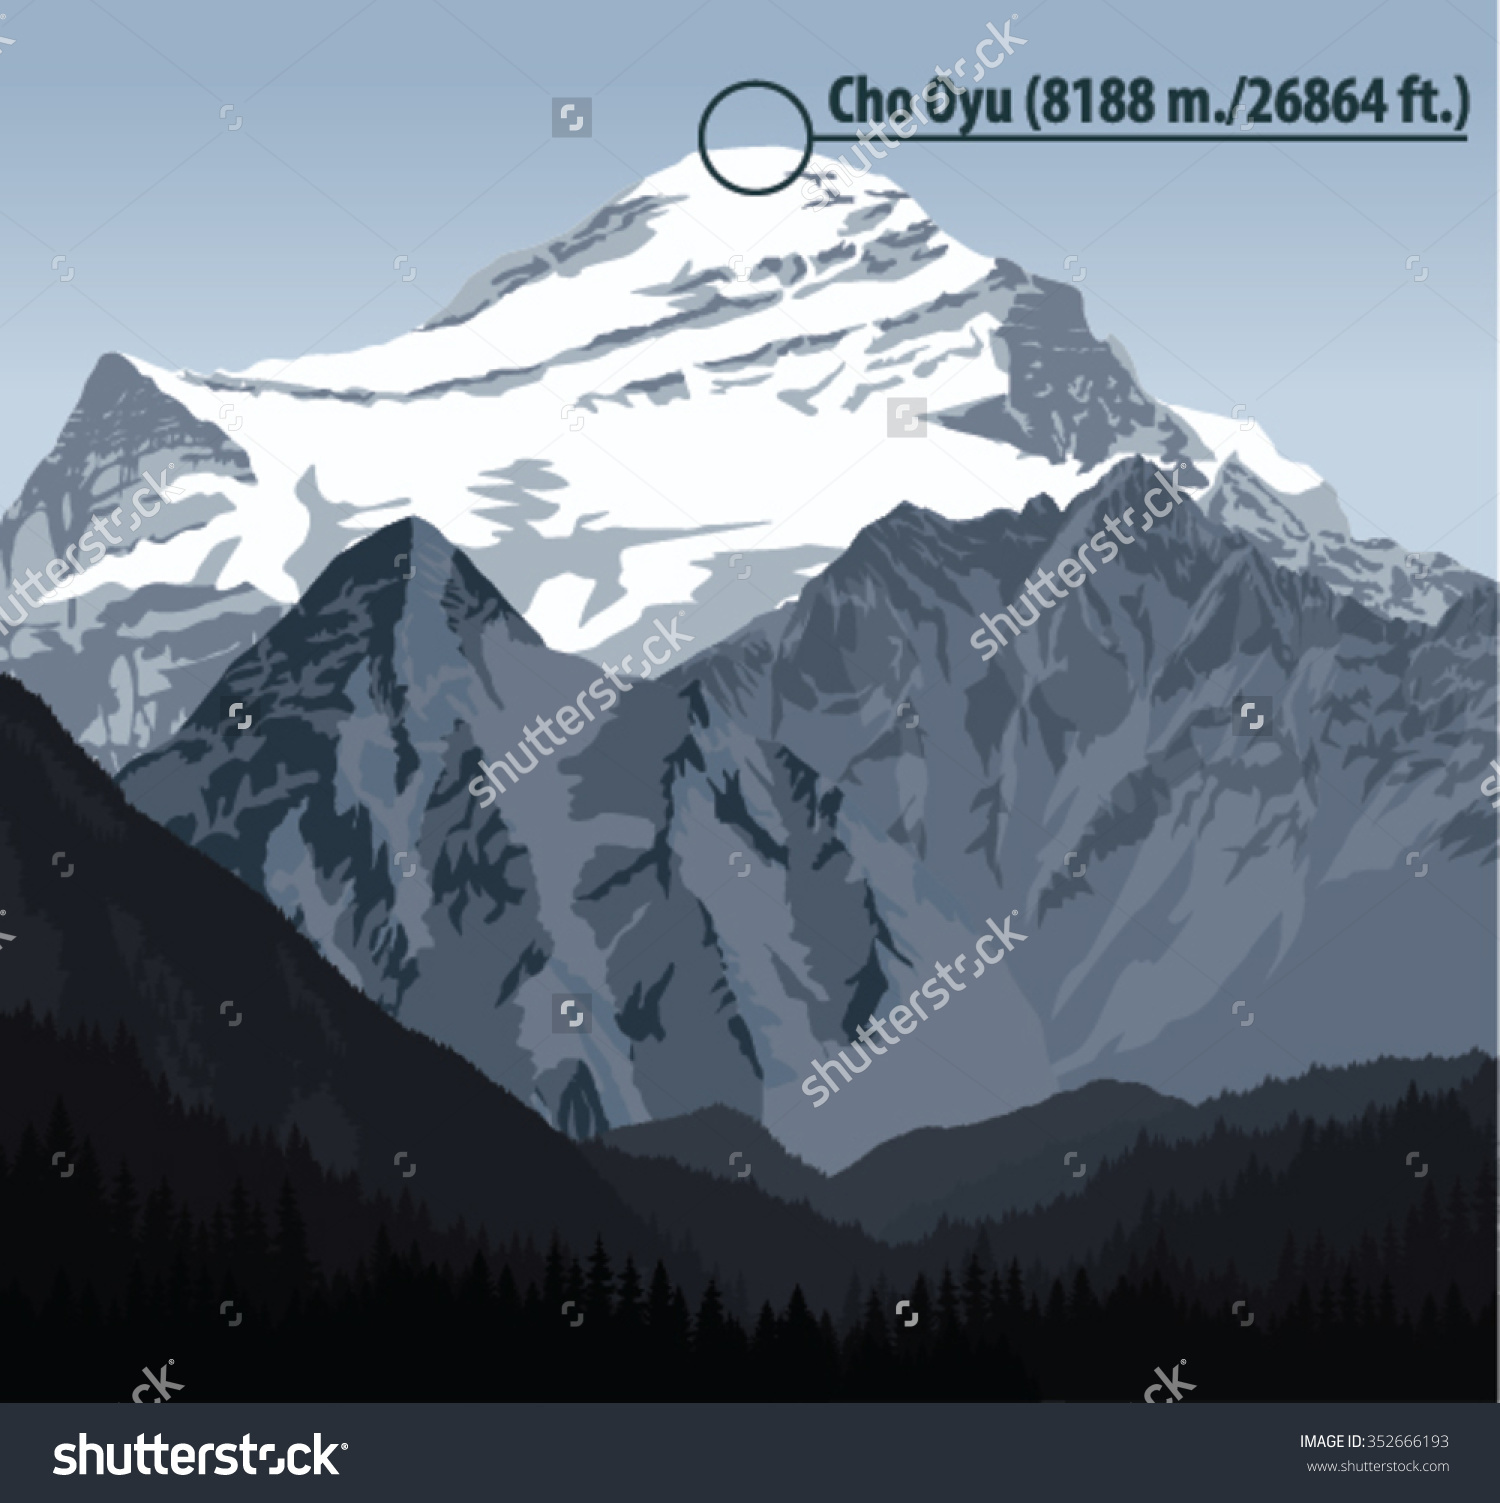 Cho Oyu clipart #4, Download drawings